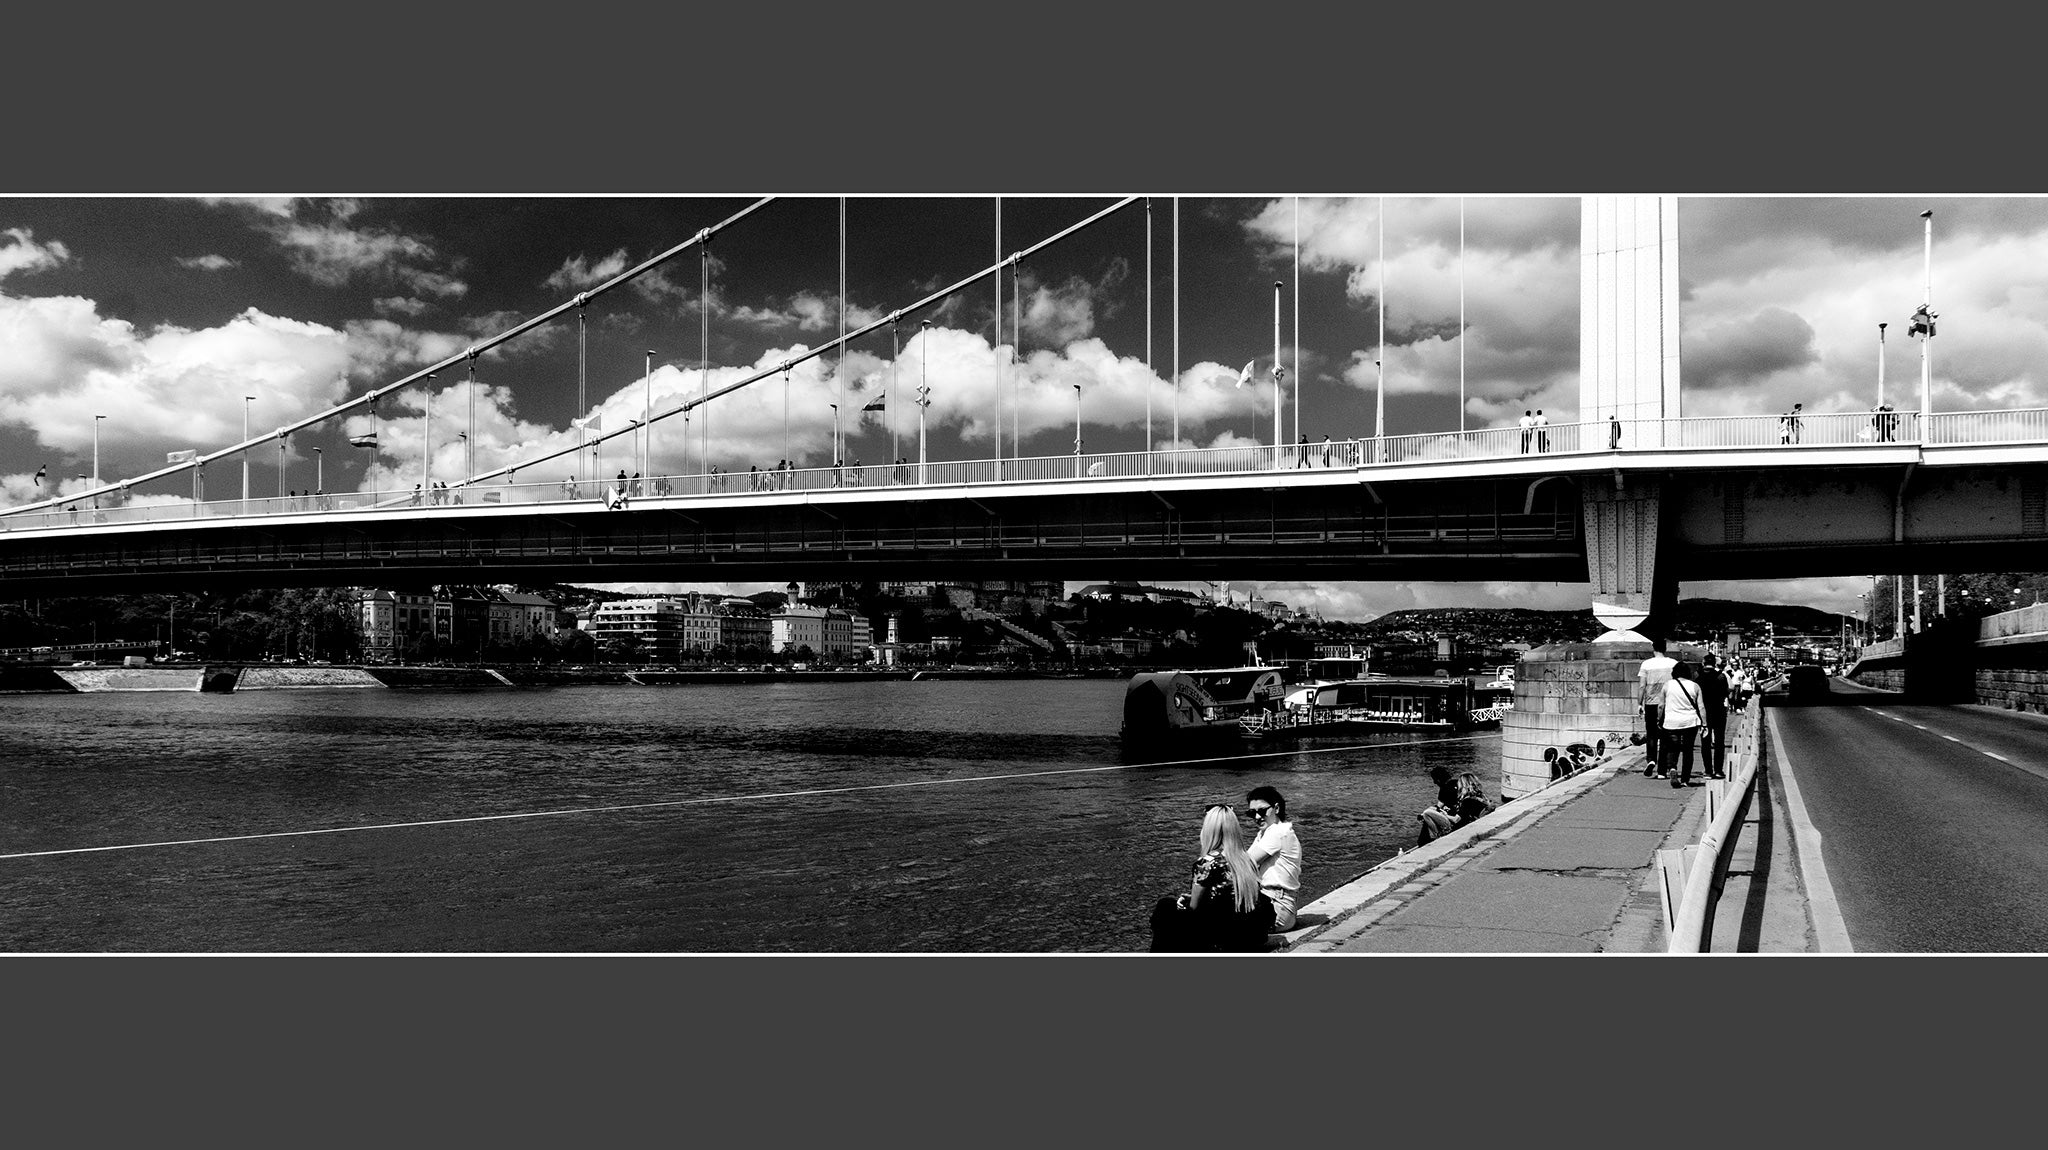 BUDAPEST PANORAMA No.2972BW "WEEKEND TIME"